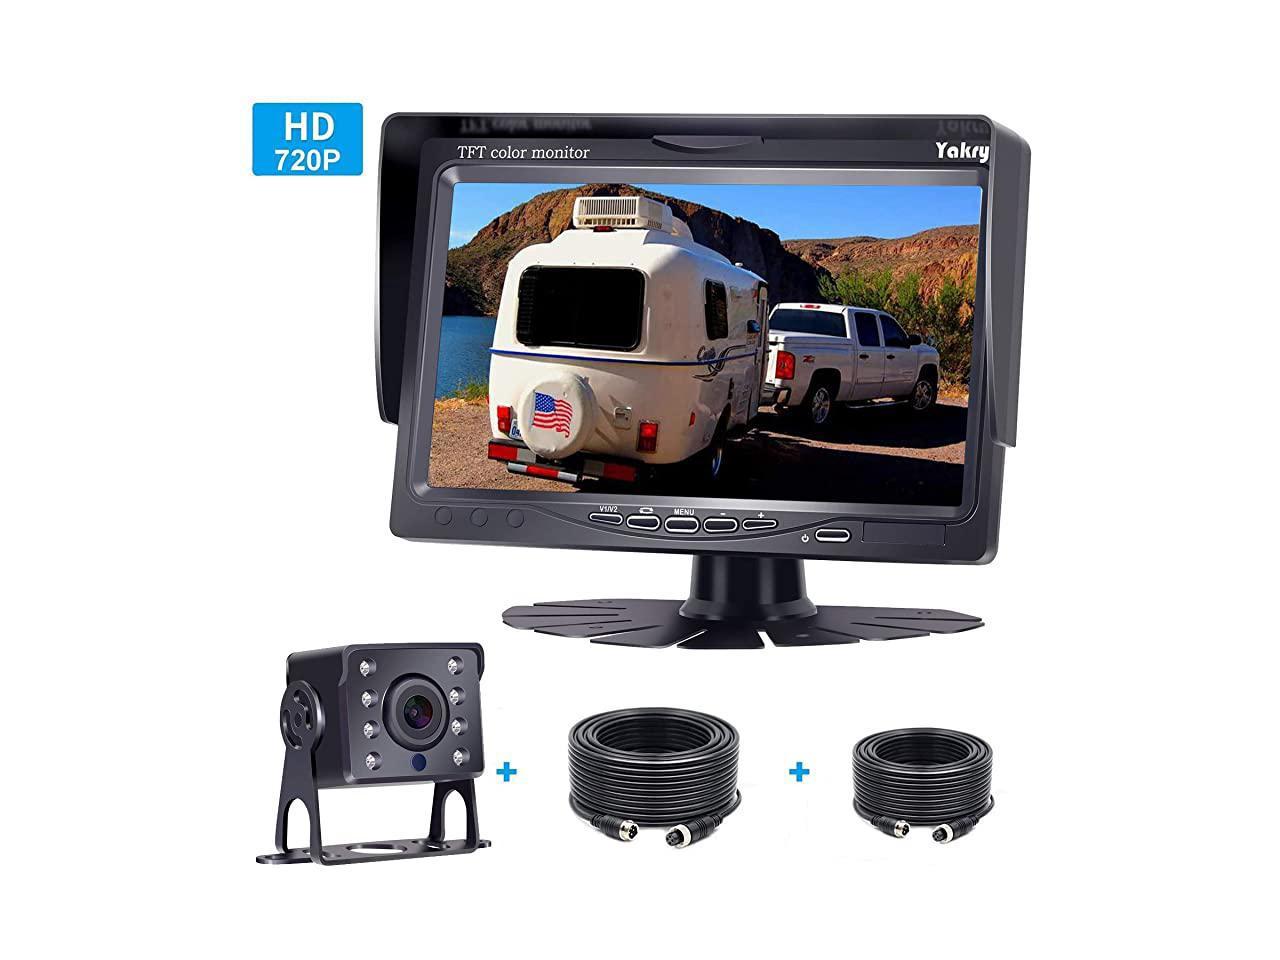 DoHonest 2K Backup Camera System with 7 TFT Monitor High-Speed Observation Kit for RVs,Trailers,Trucks,Fifth Wheels,Bus Rear/Front View Camera IP69K Waterproof Driving/Reversing Use V22 